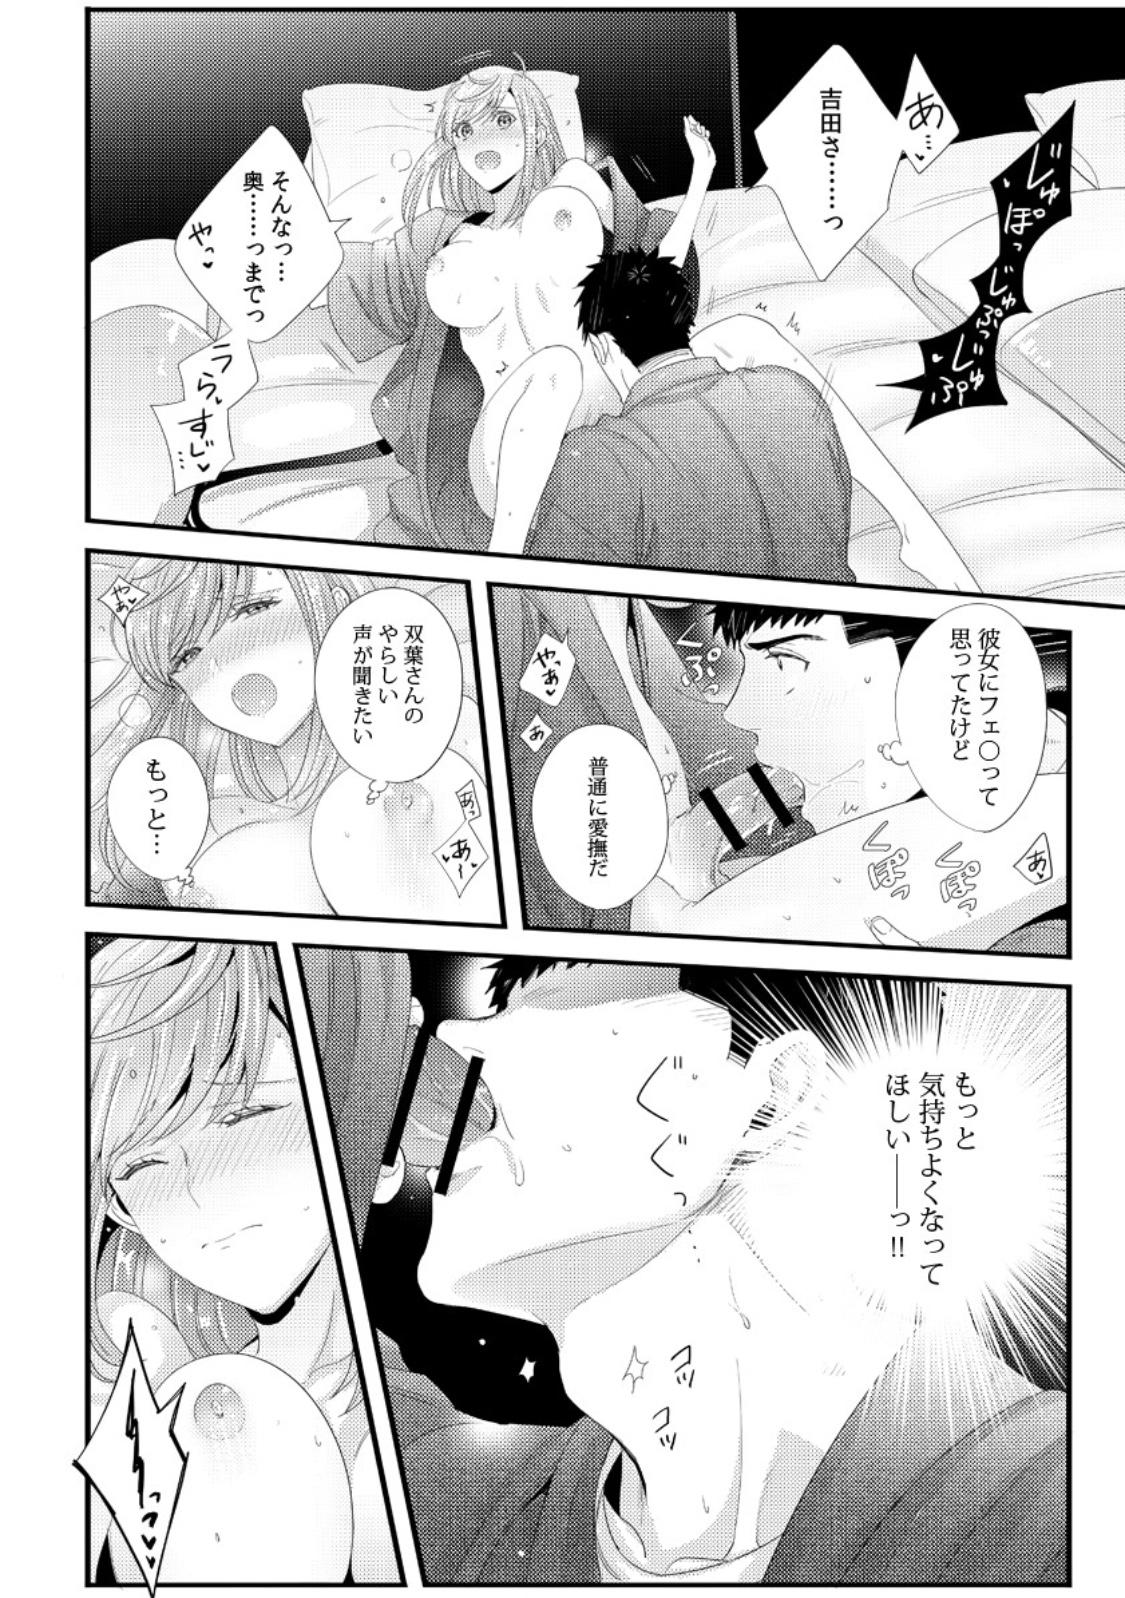 Please Let Me Hold You Futaba-San! Ch. 1+2 21